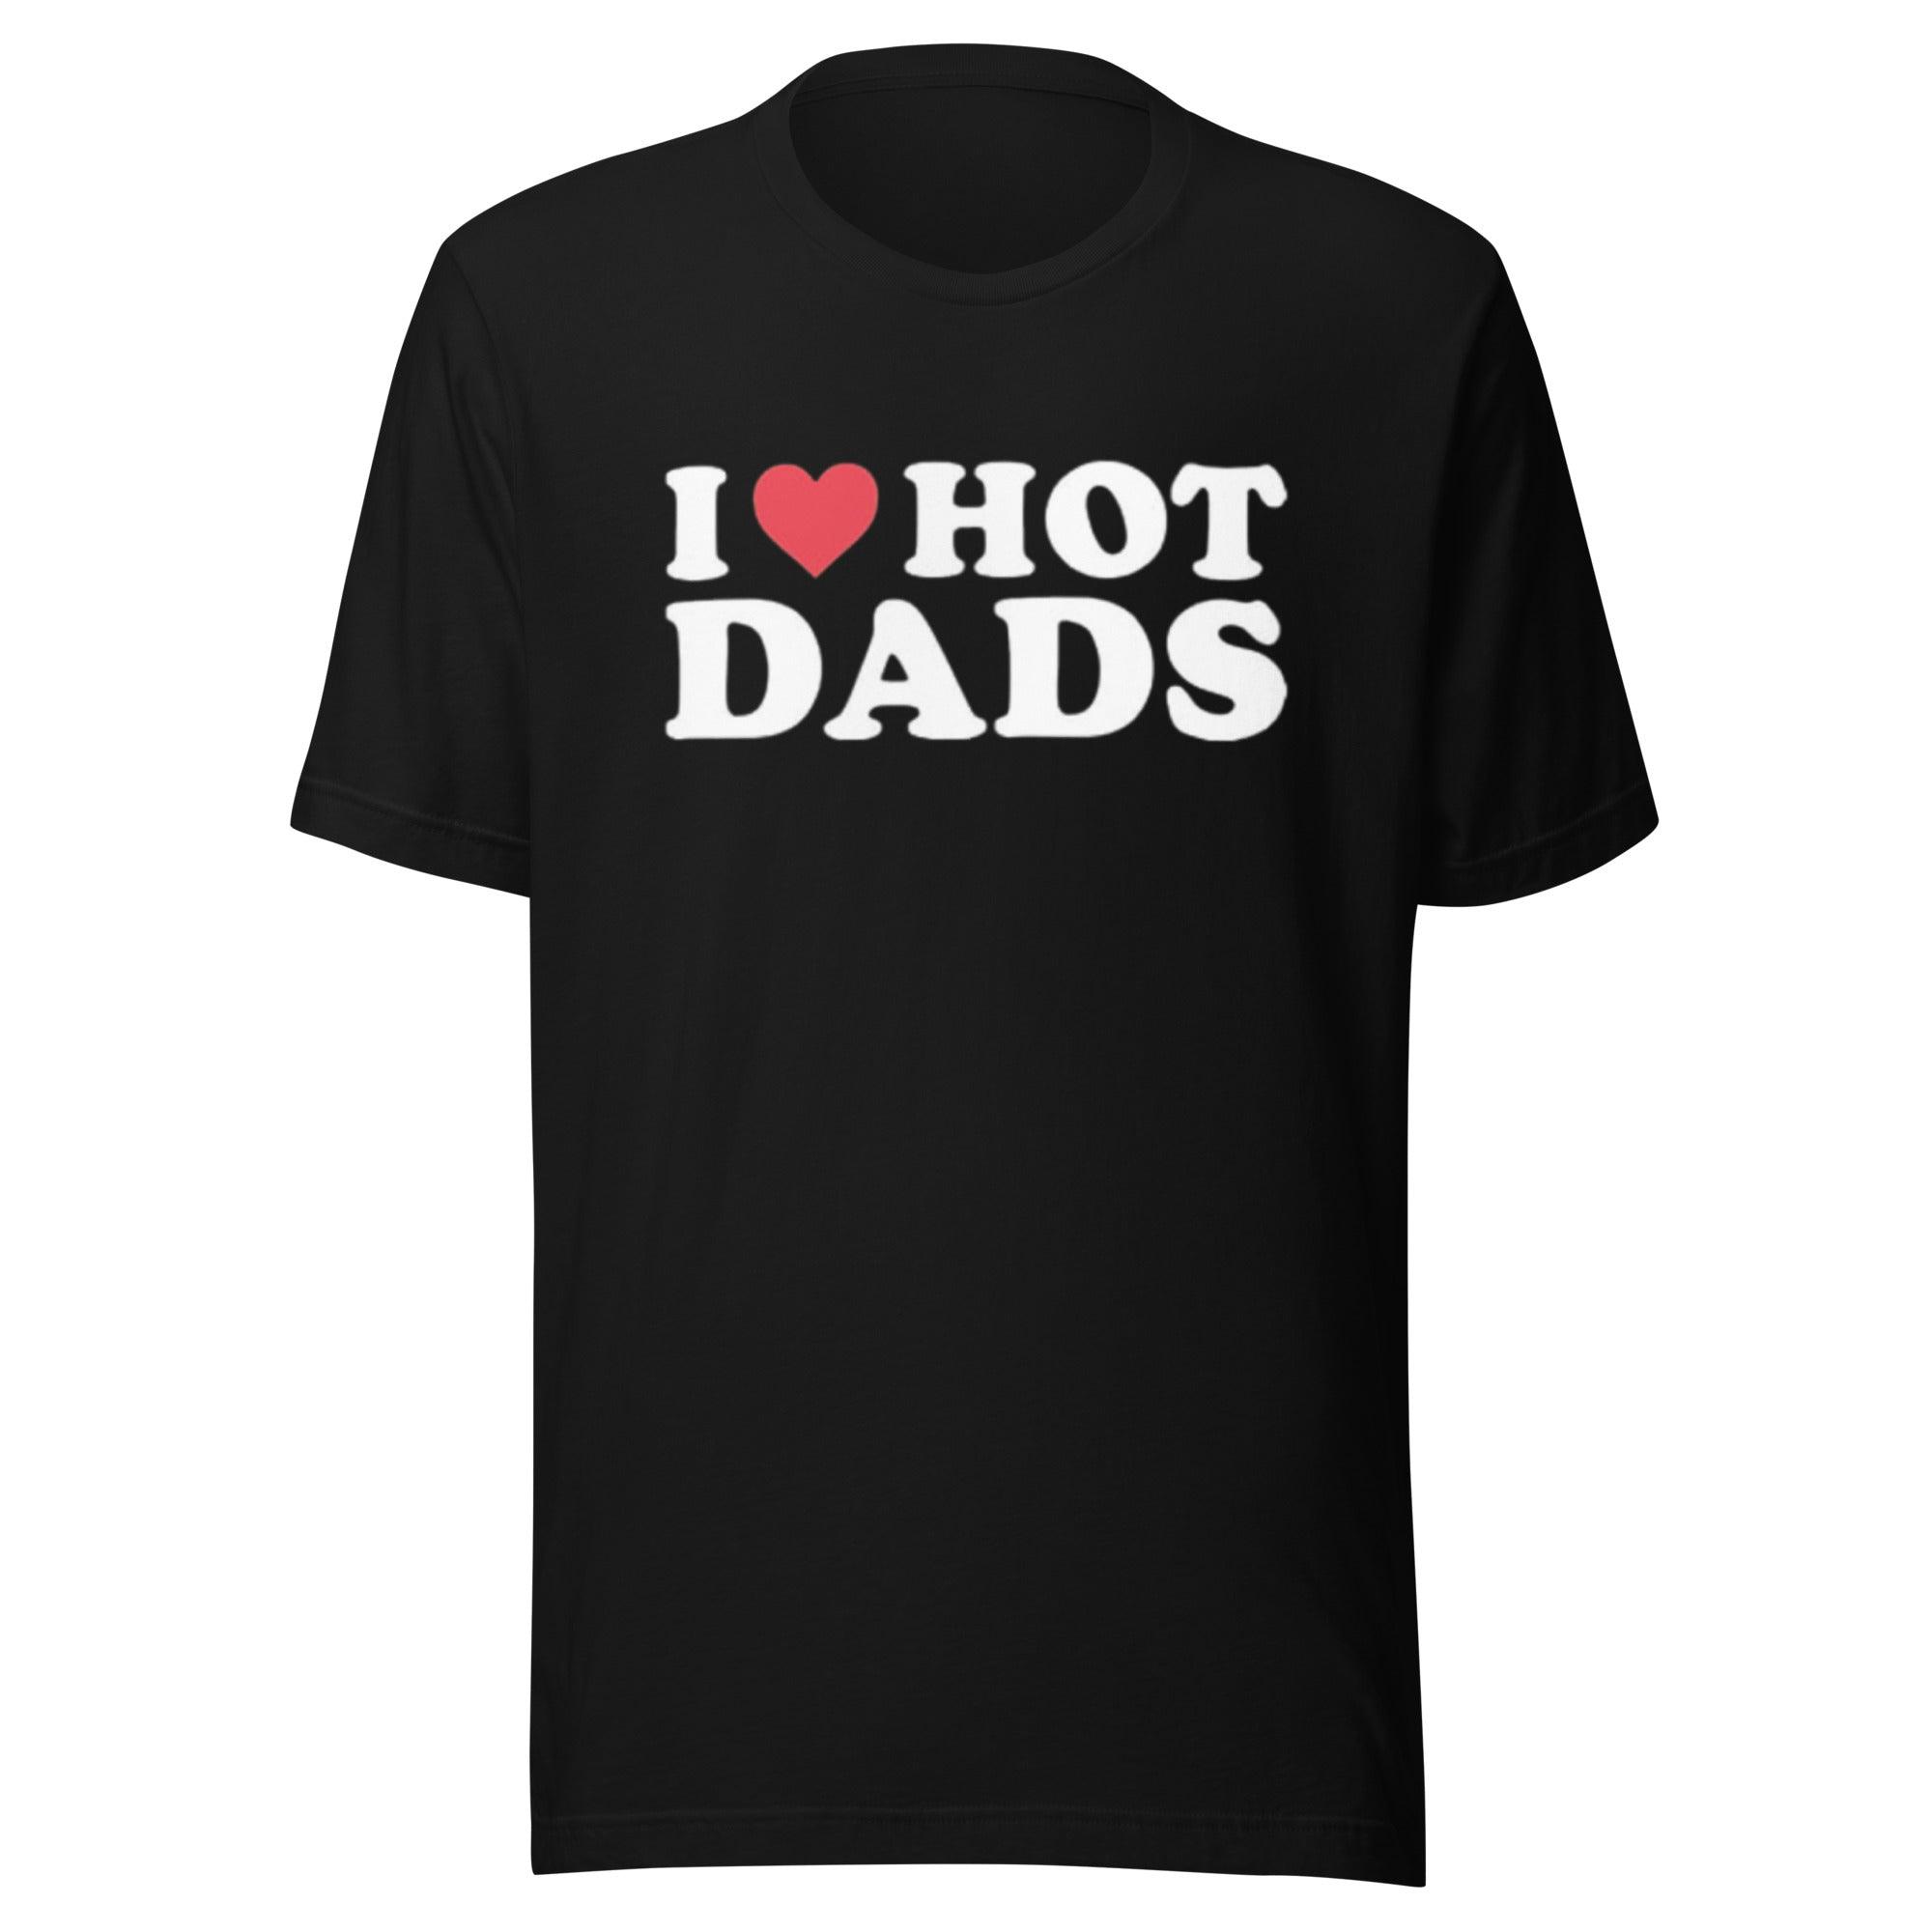 I Love Hot Dads T-shirt with Heart Shaped Love Short Sleeve Top